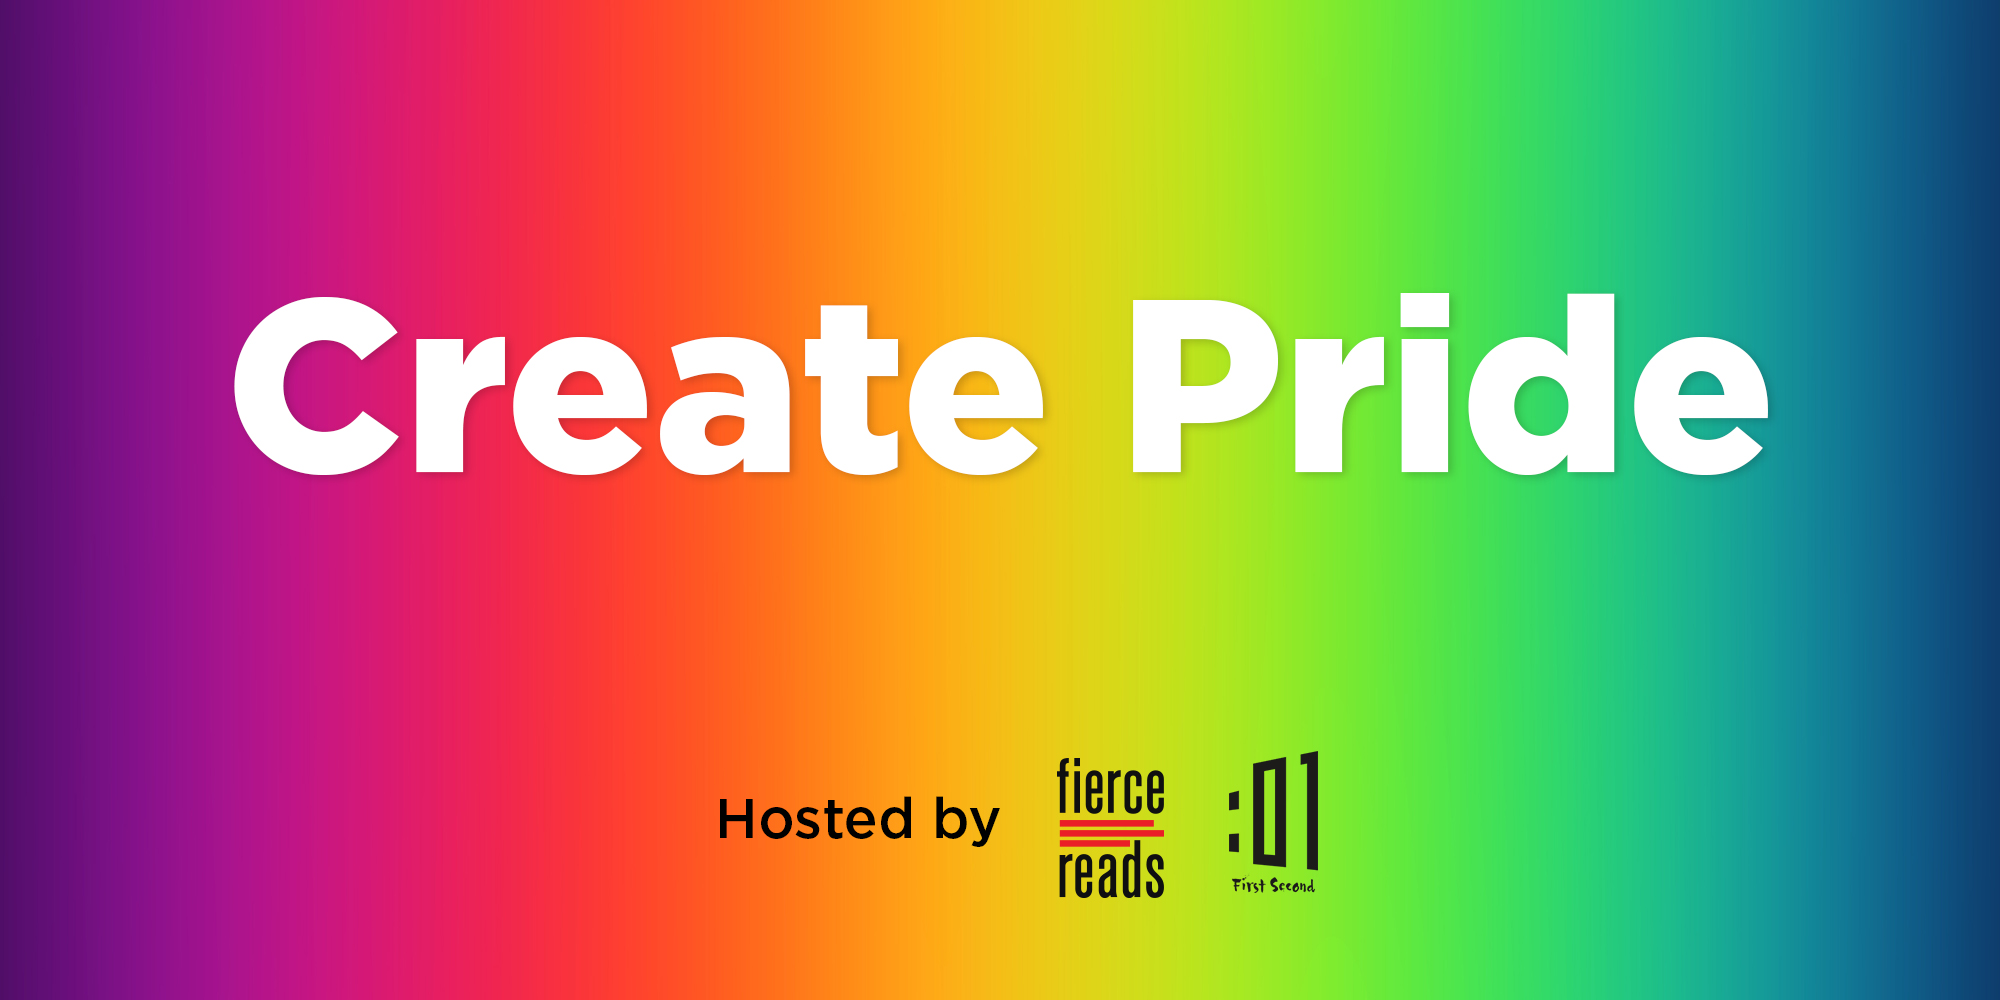 Create Pride with Fierce Reads & First Second!